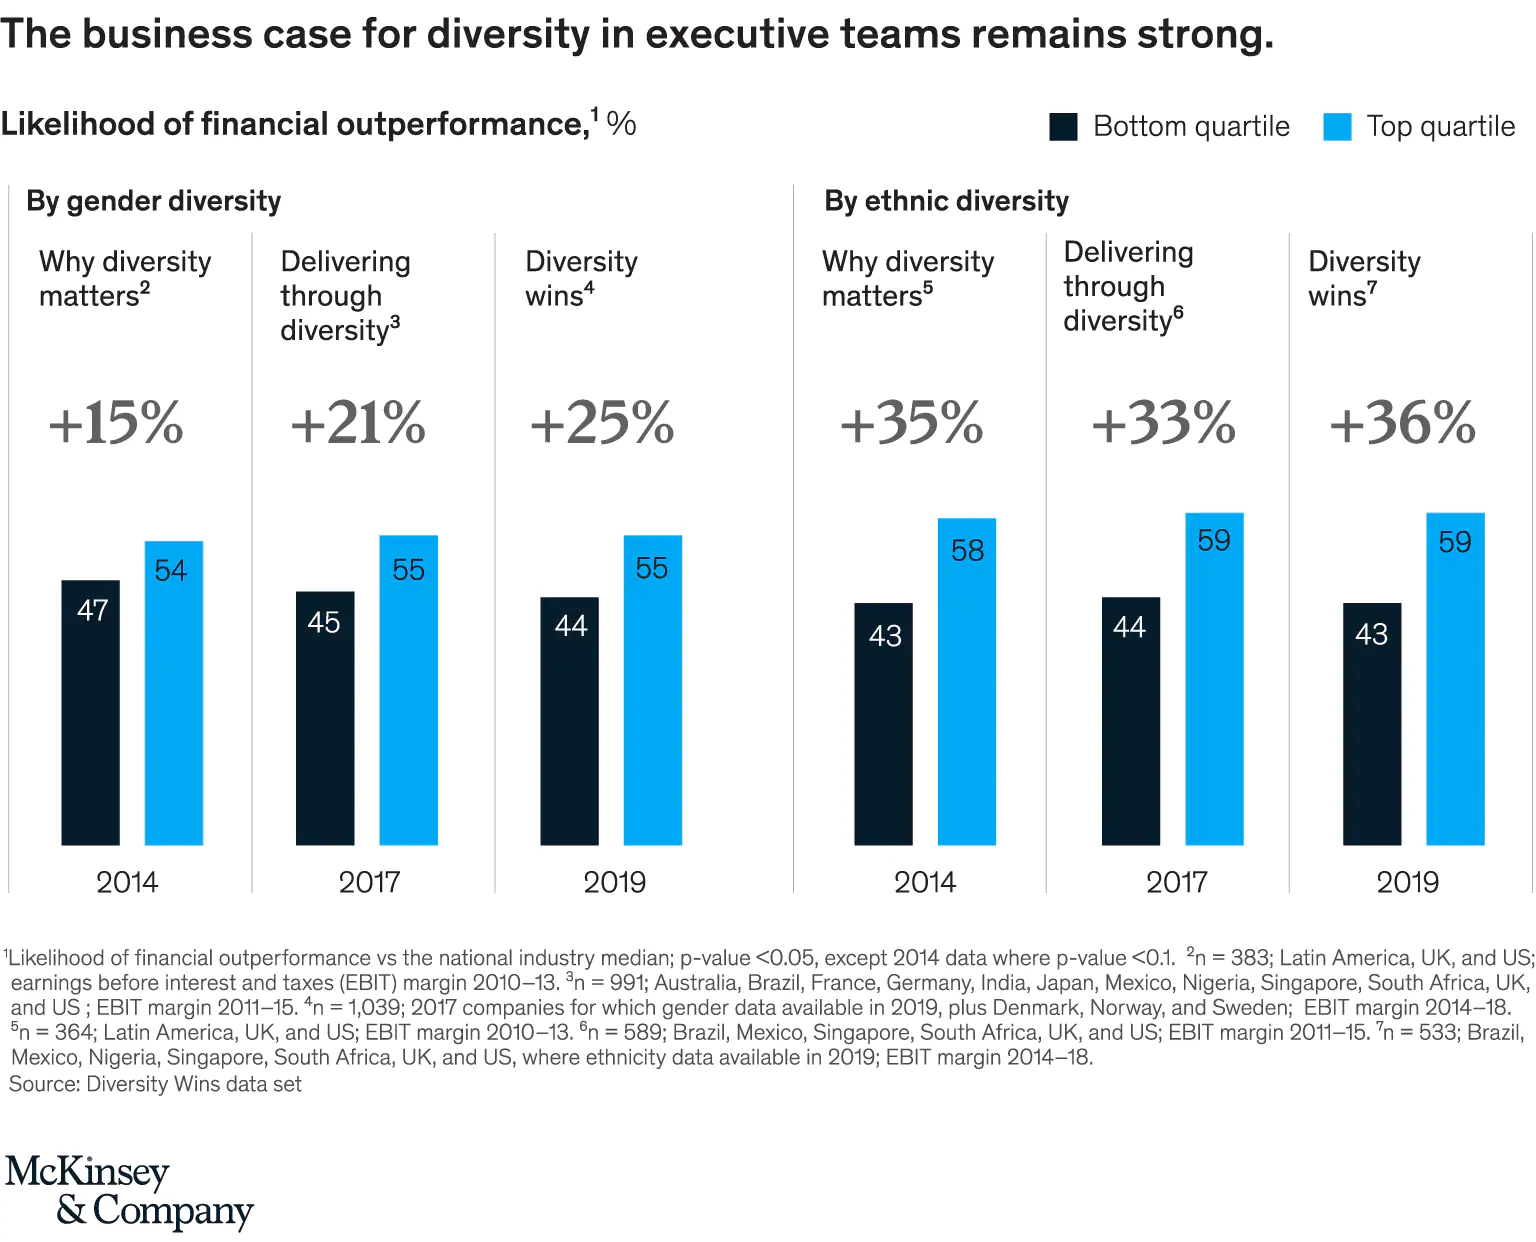 Infographic about diversity and its affect on financial outcomes.